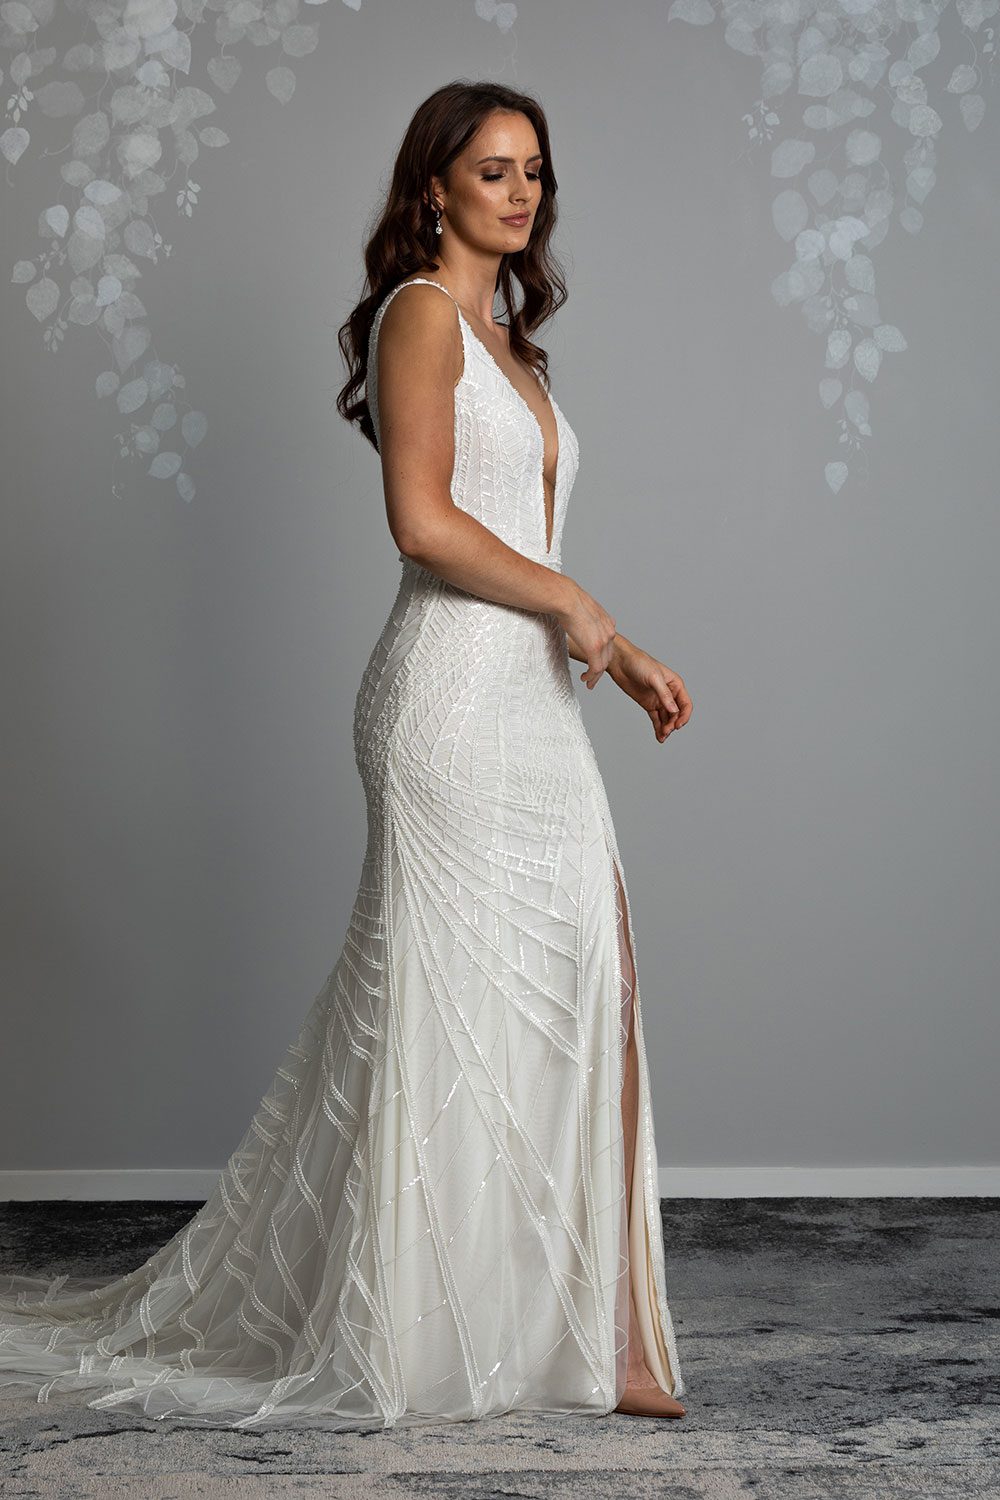 Elle Wedding gown from Vinka Design - Wedding dress with illusion neckline and deep plunge in the front with low back. Stunning beaded embroidery over a stretch base that sculpts and flatters the figure and falls into a beautiful flared train. Profile view of dress with deep plunge neckline and optional side split